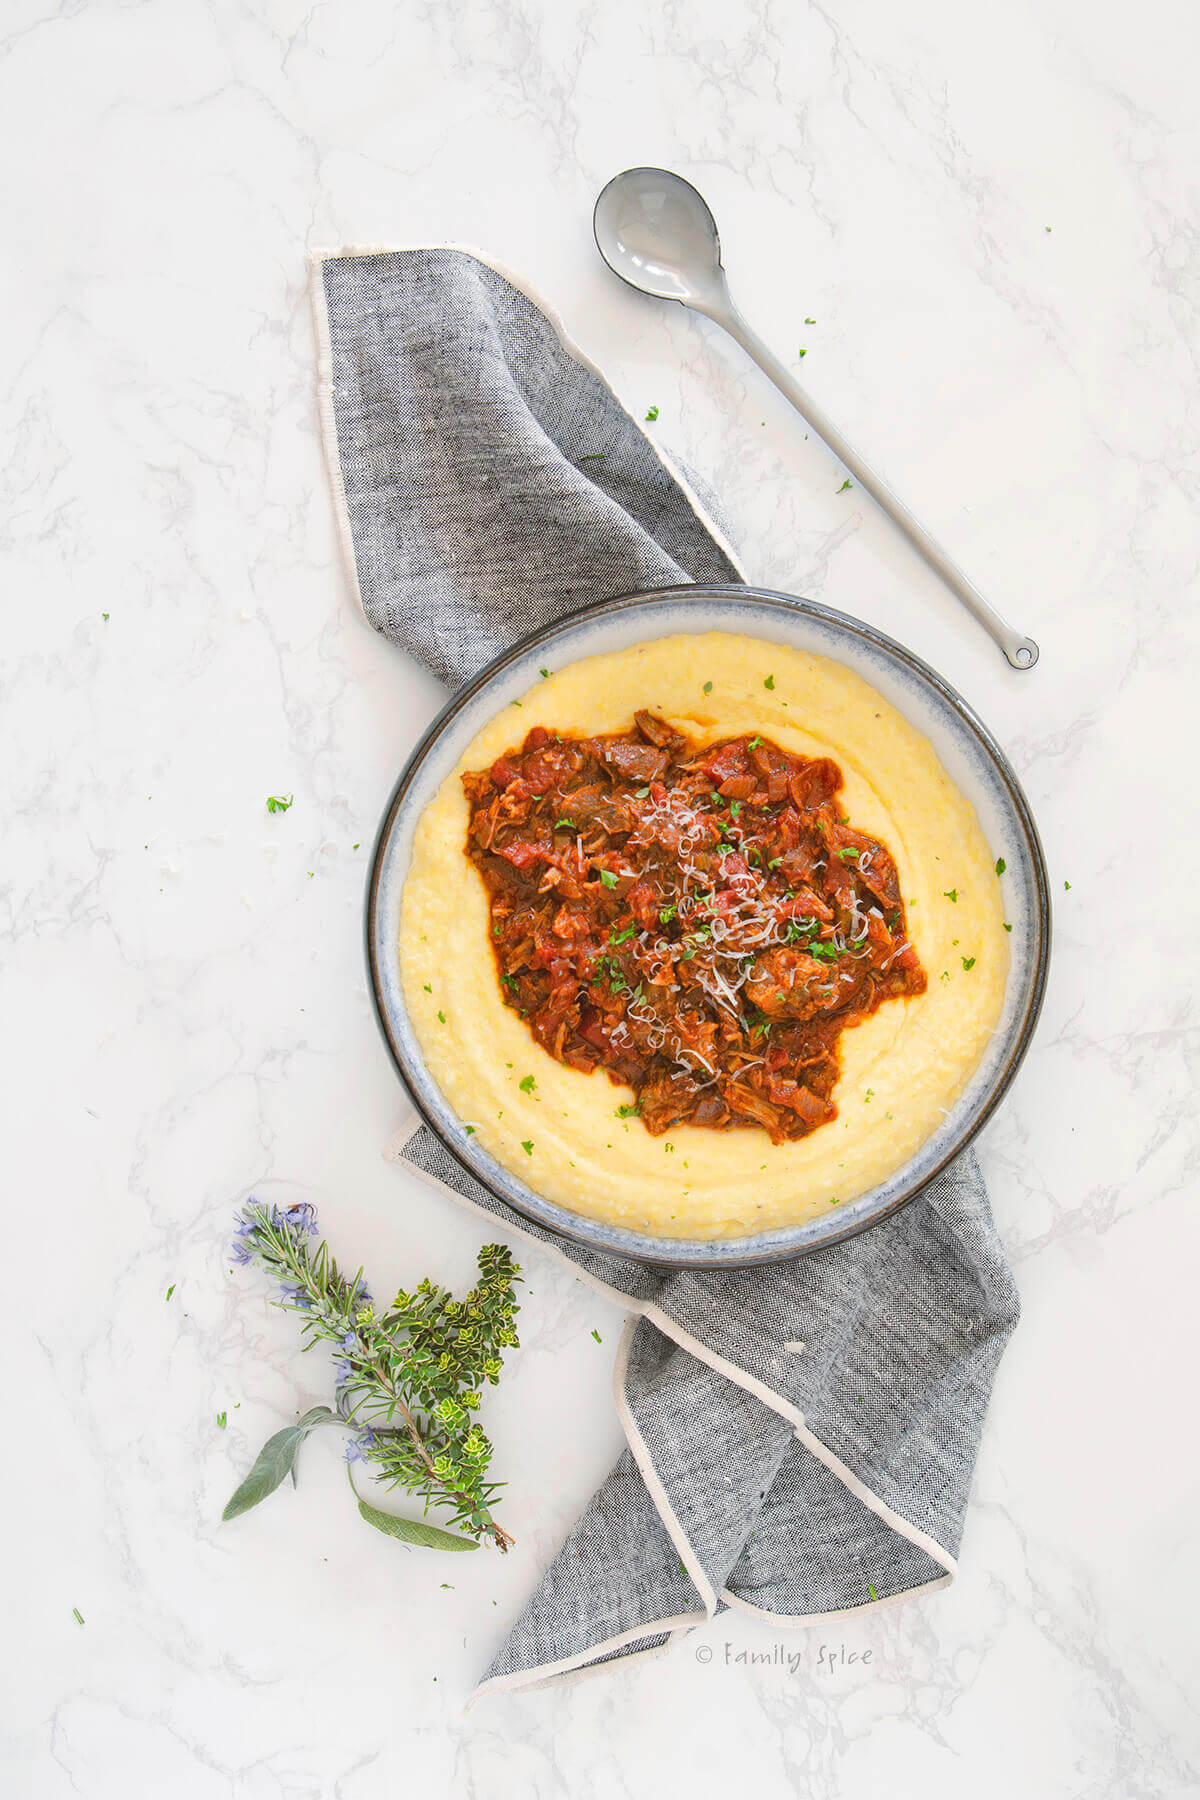 Top view of a shallow bowl with creamy polenta and topped with pork ragu on a napkin with herbs next to it